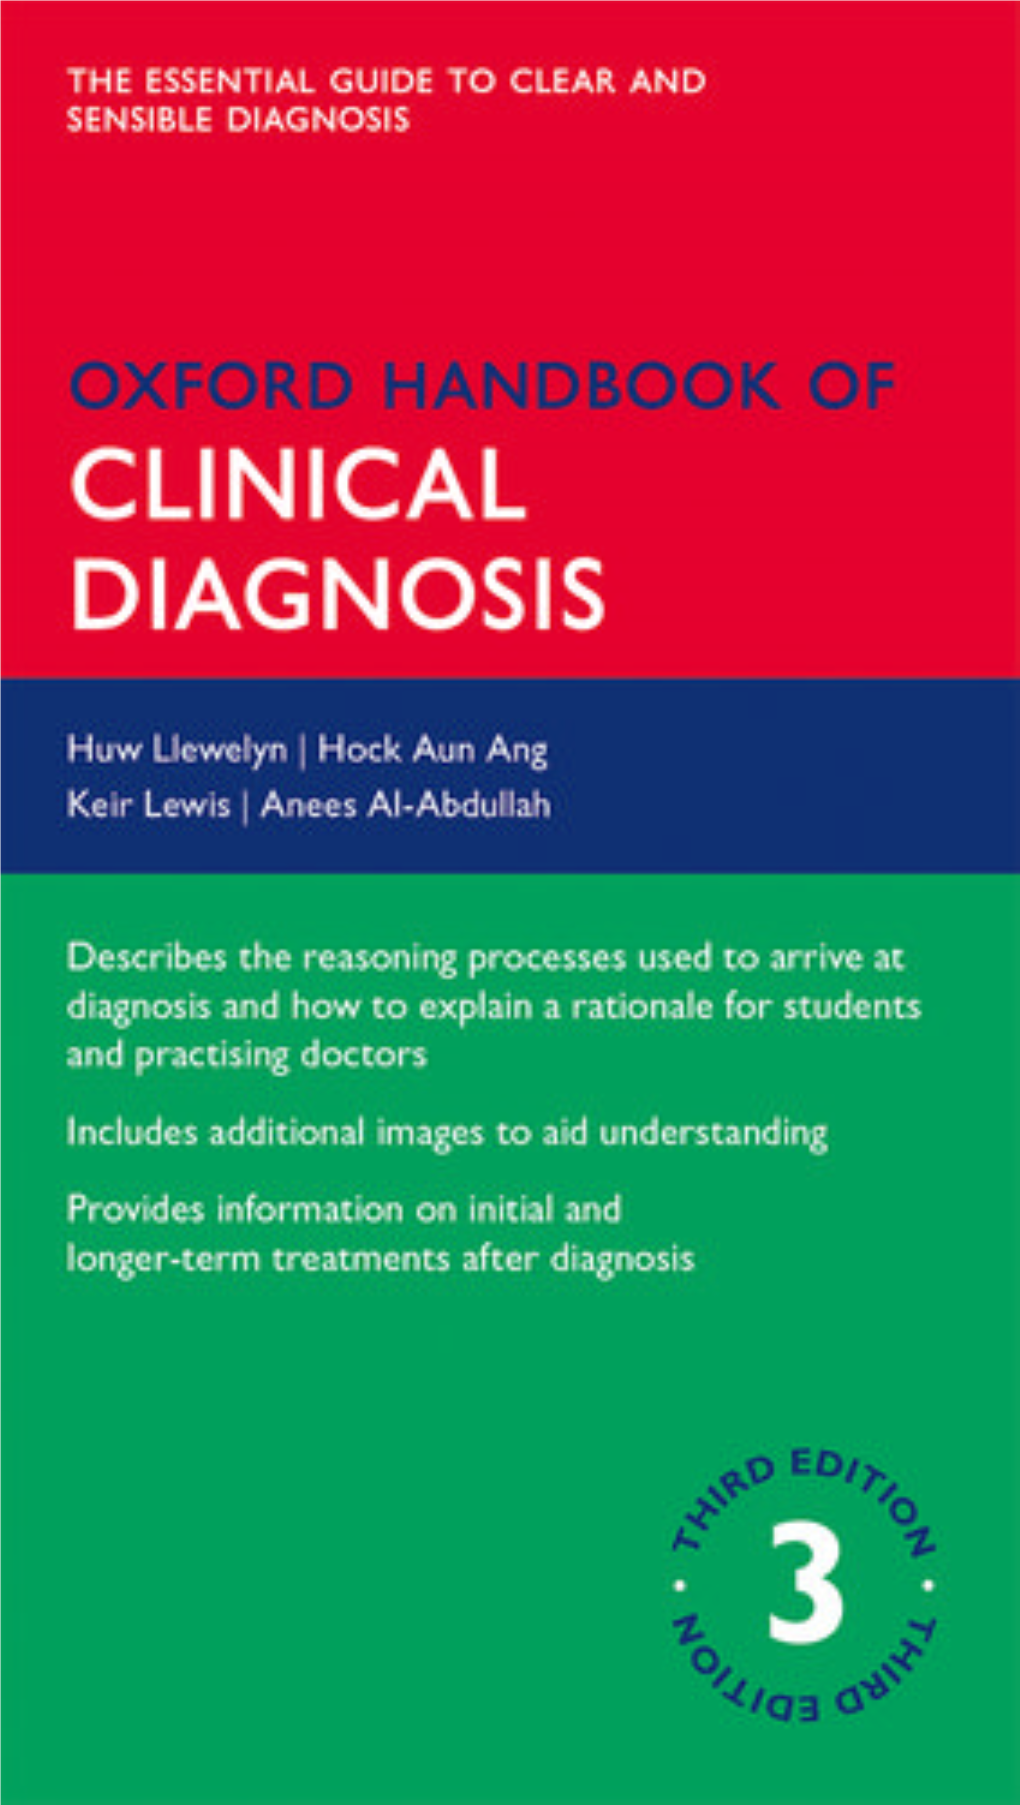 Oxford Handbook of Clinical Diagnosis Published and Forthcoming Oxford Handbooks